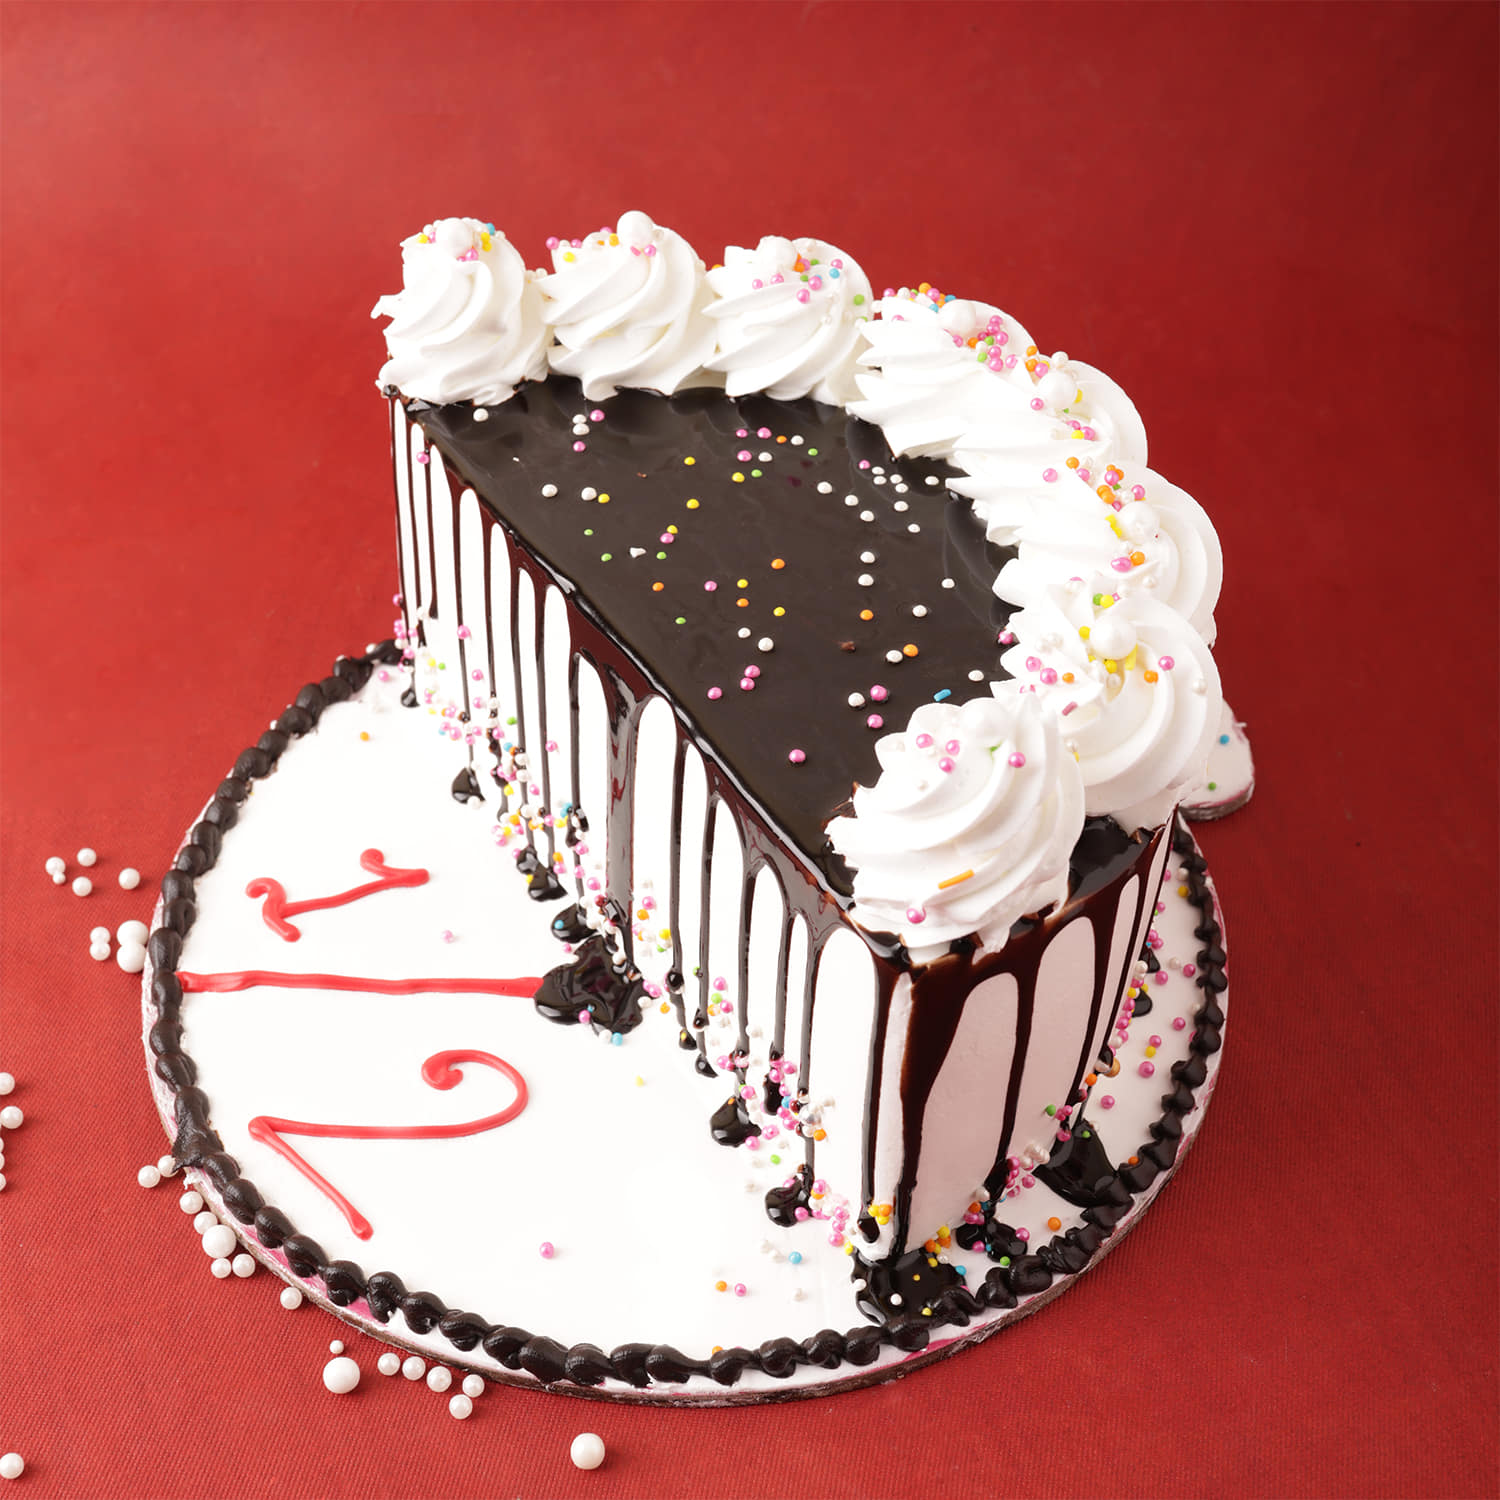 Online Cake Delivery in Mumbai within 2 Hour - Upto ₹300 OFF